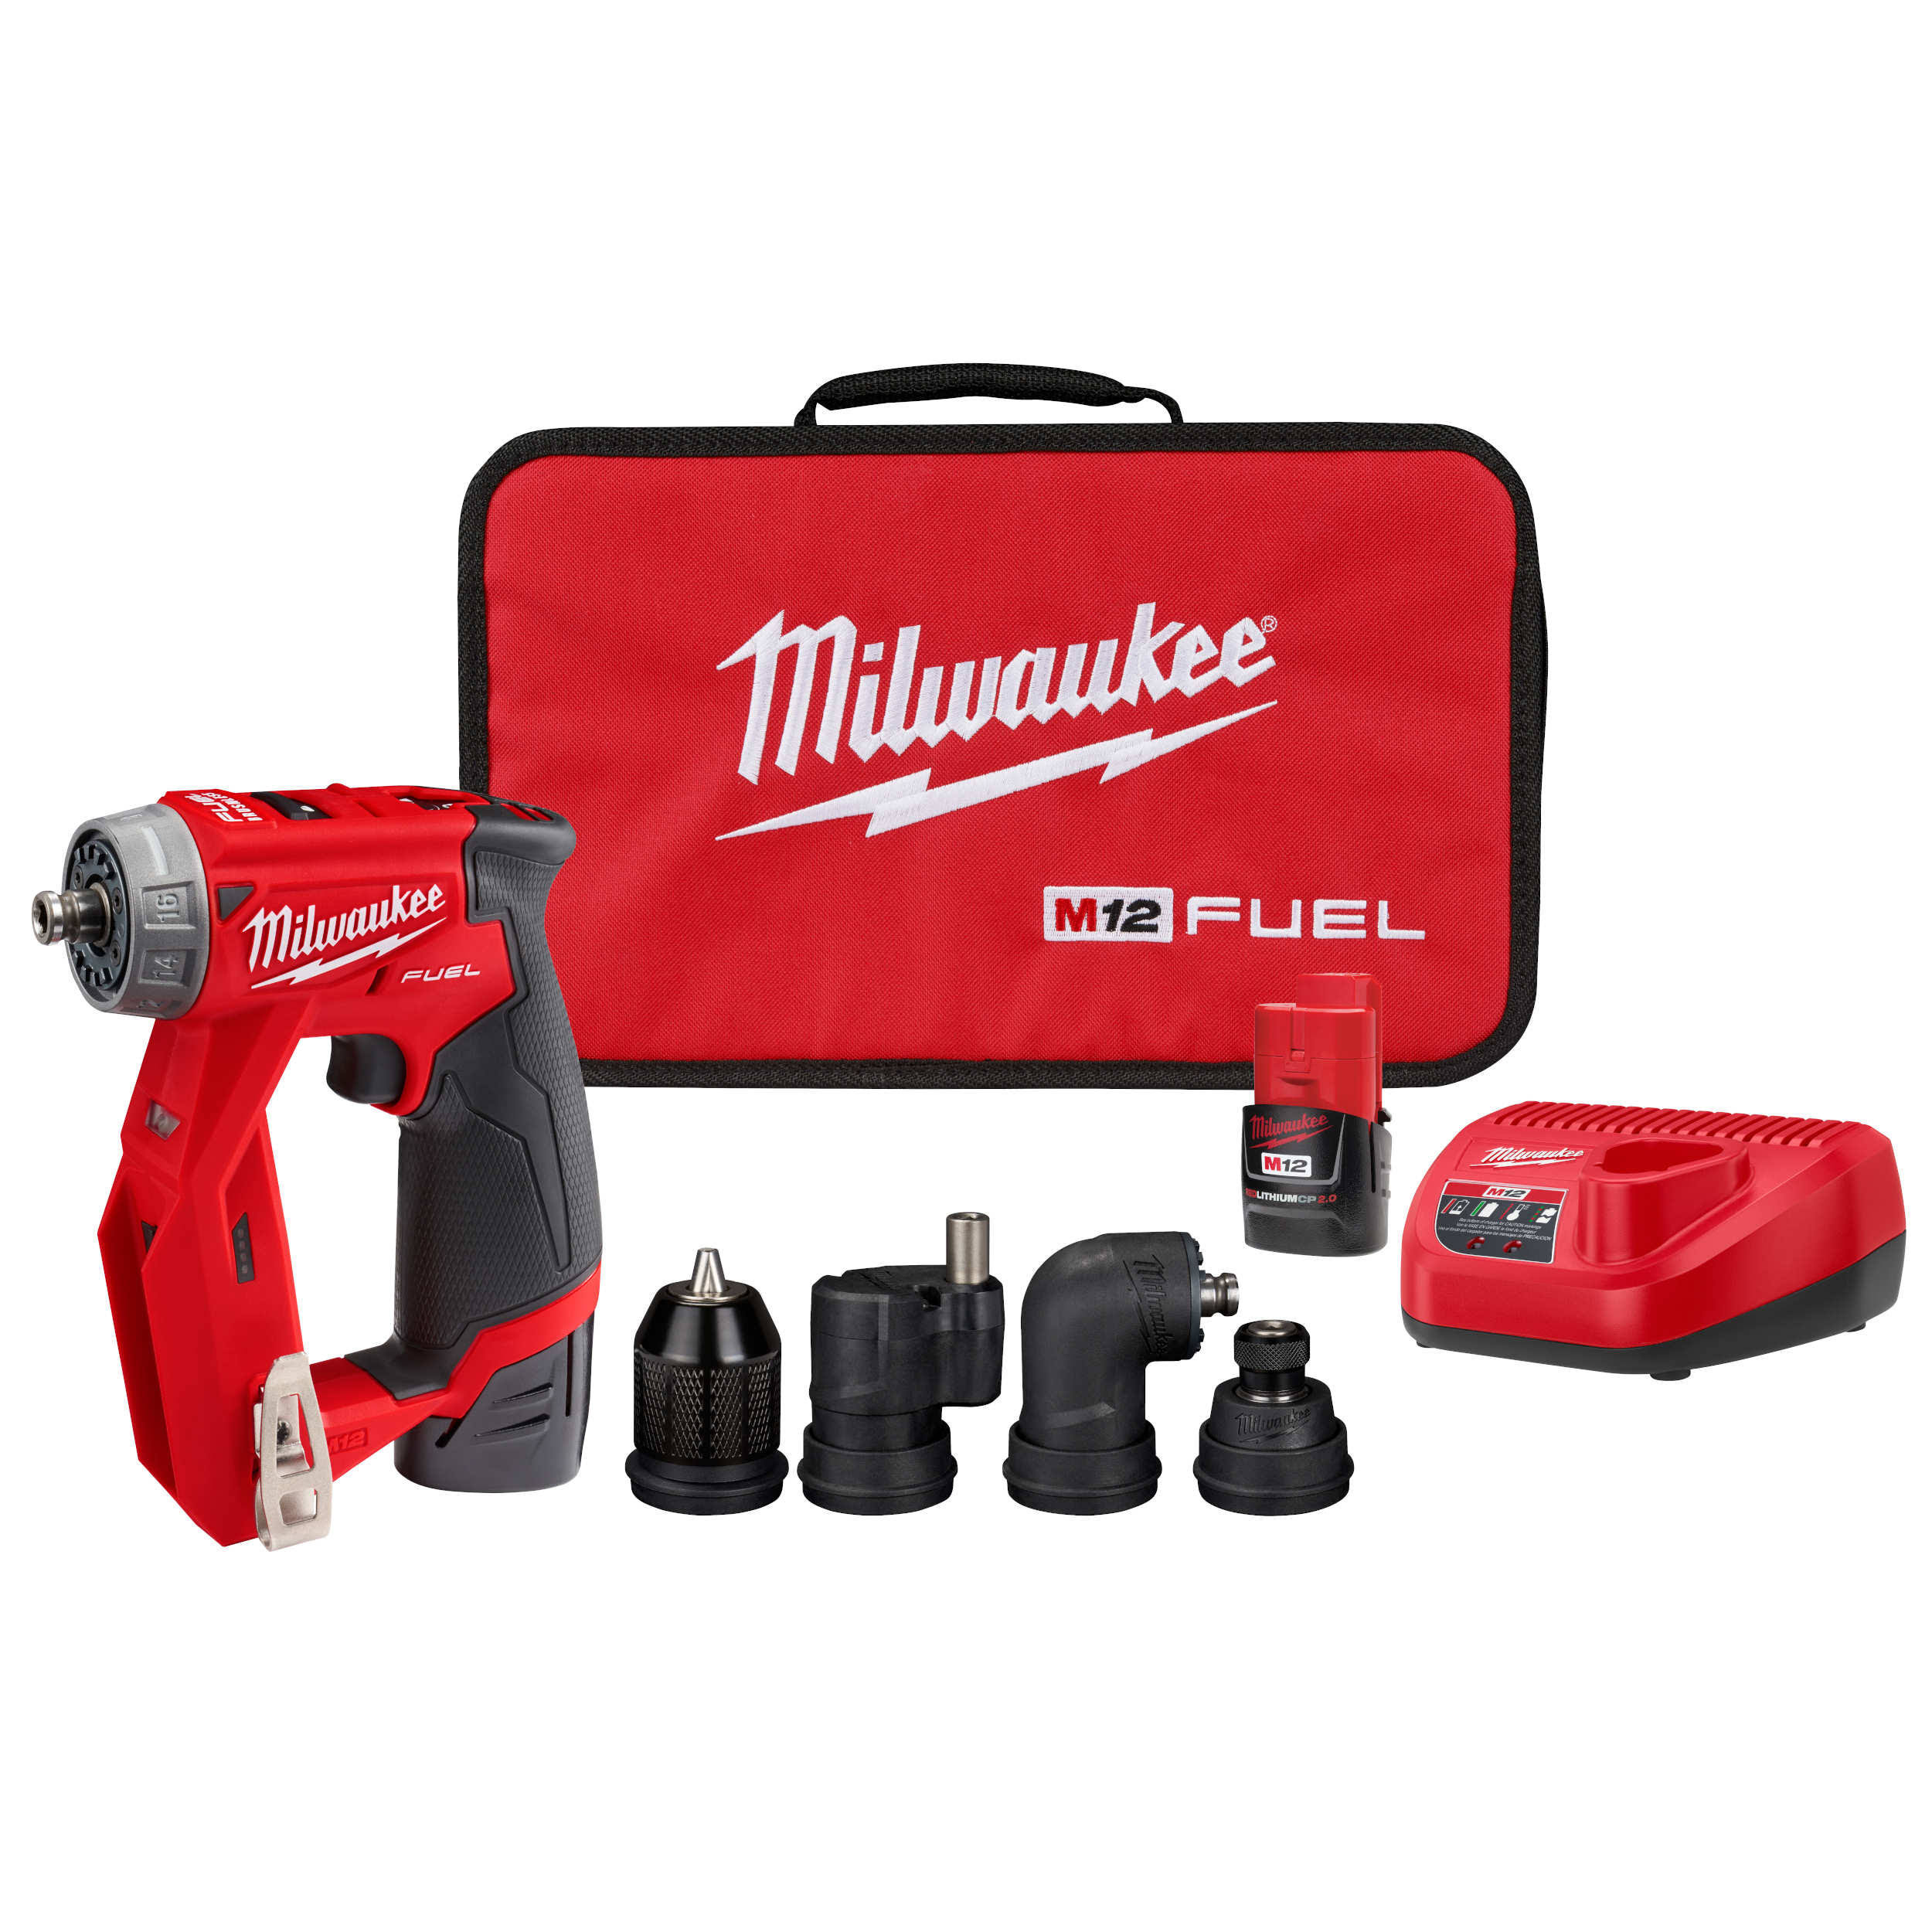 Milwaukee 2505-22 M12 Fuel Brushless Installation 4-in-1 Drill Driver Kit - 2.0Ah